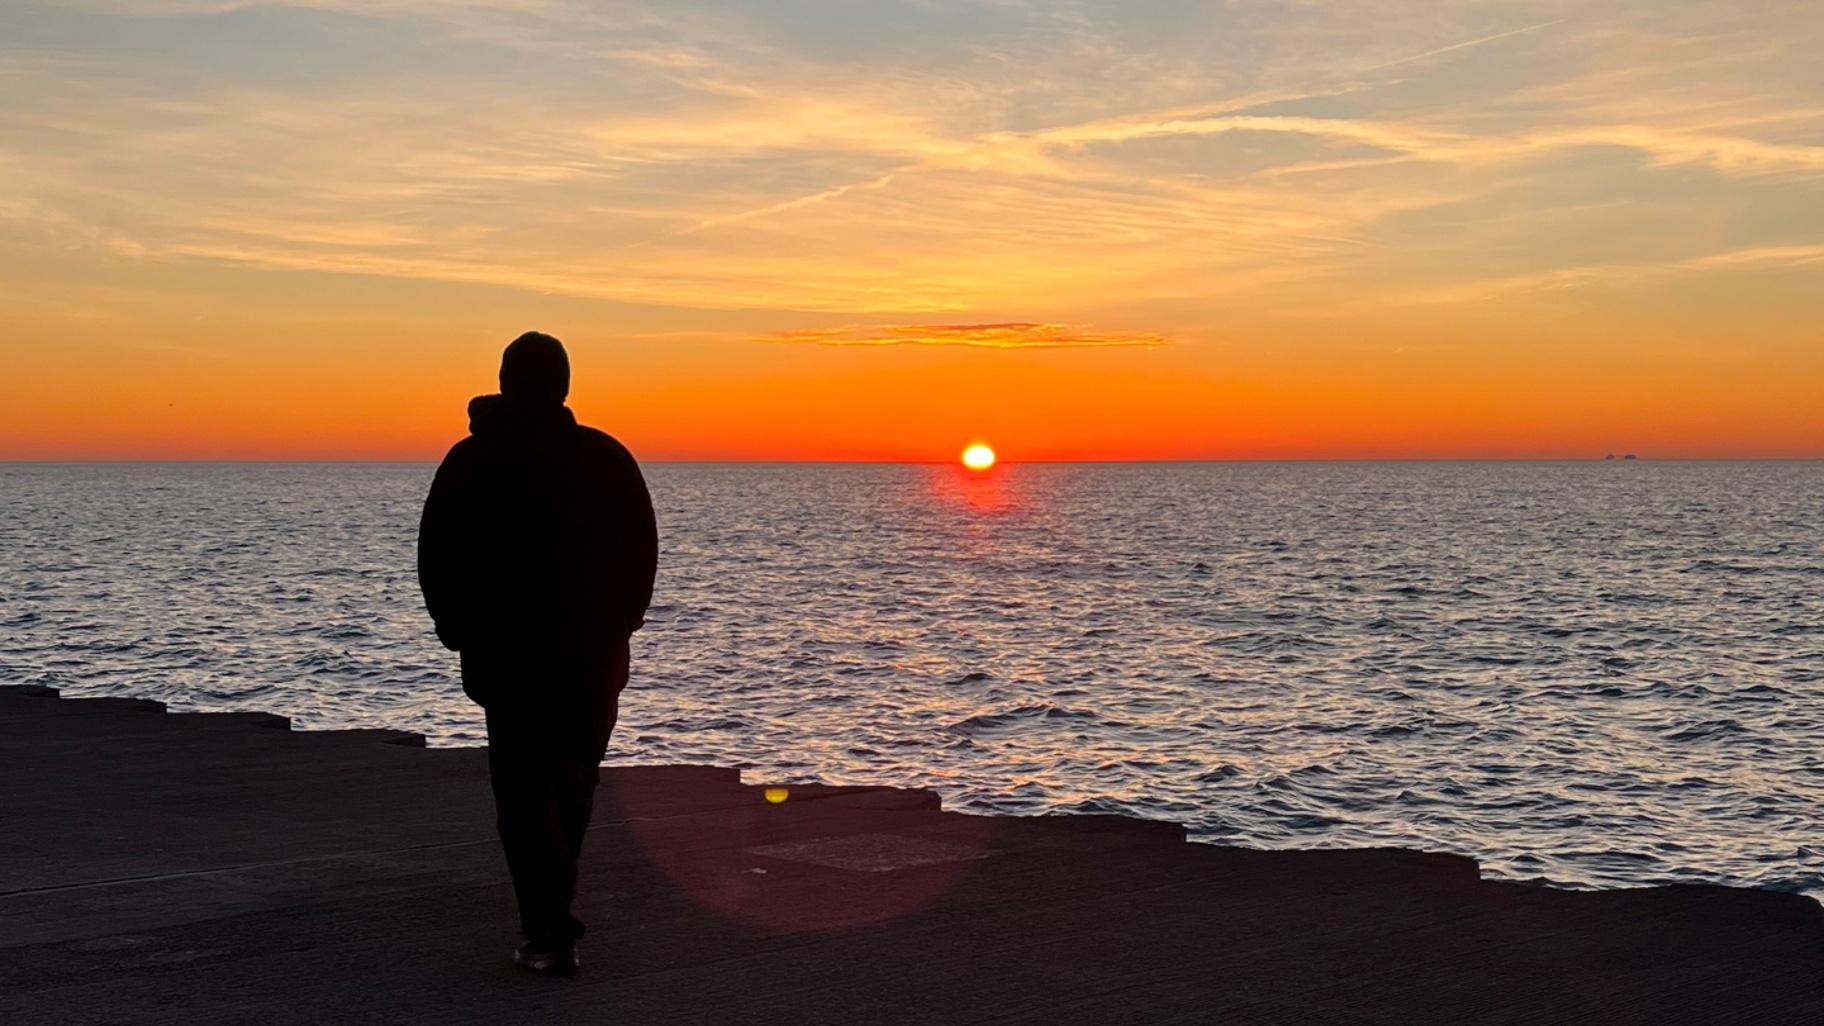 Jimmy Soto looks at a sunset after his release from prison. (Courtesy of Pilar More)